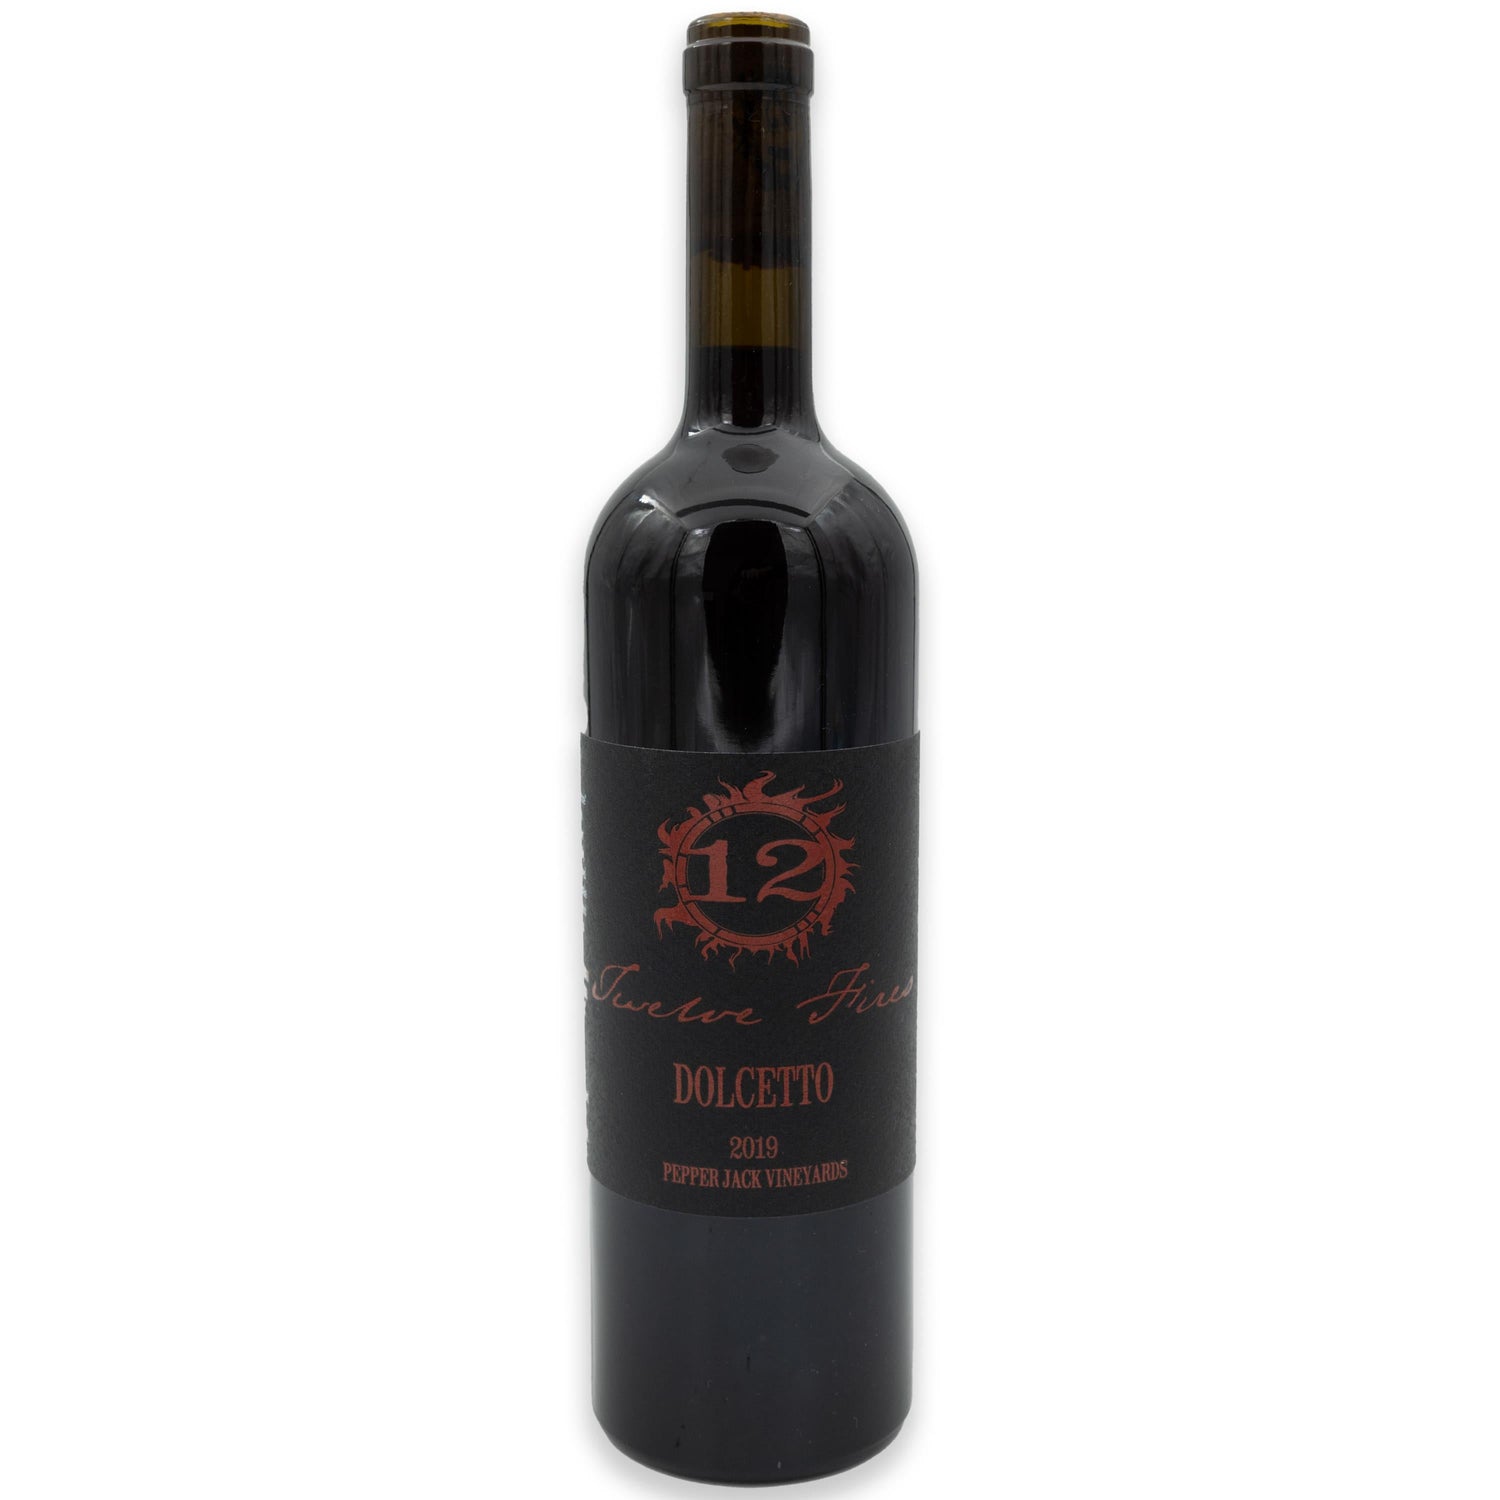 In Store Pickup Or Local Delivery Only: 12 Fires Dolcetto Red Wine 201